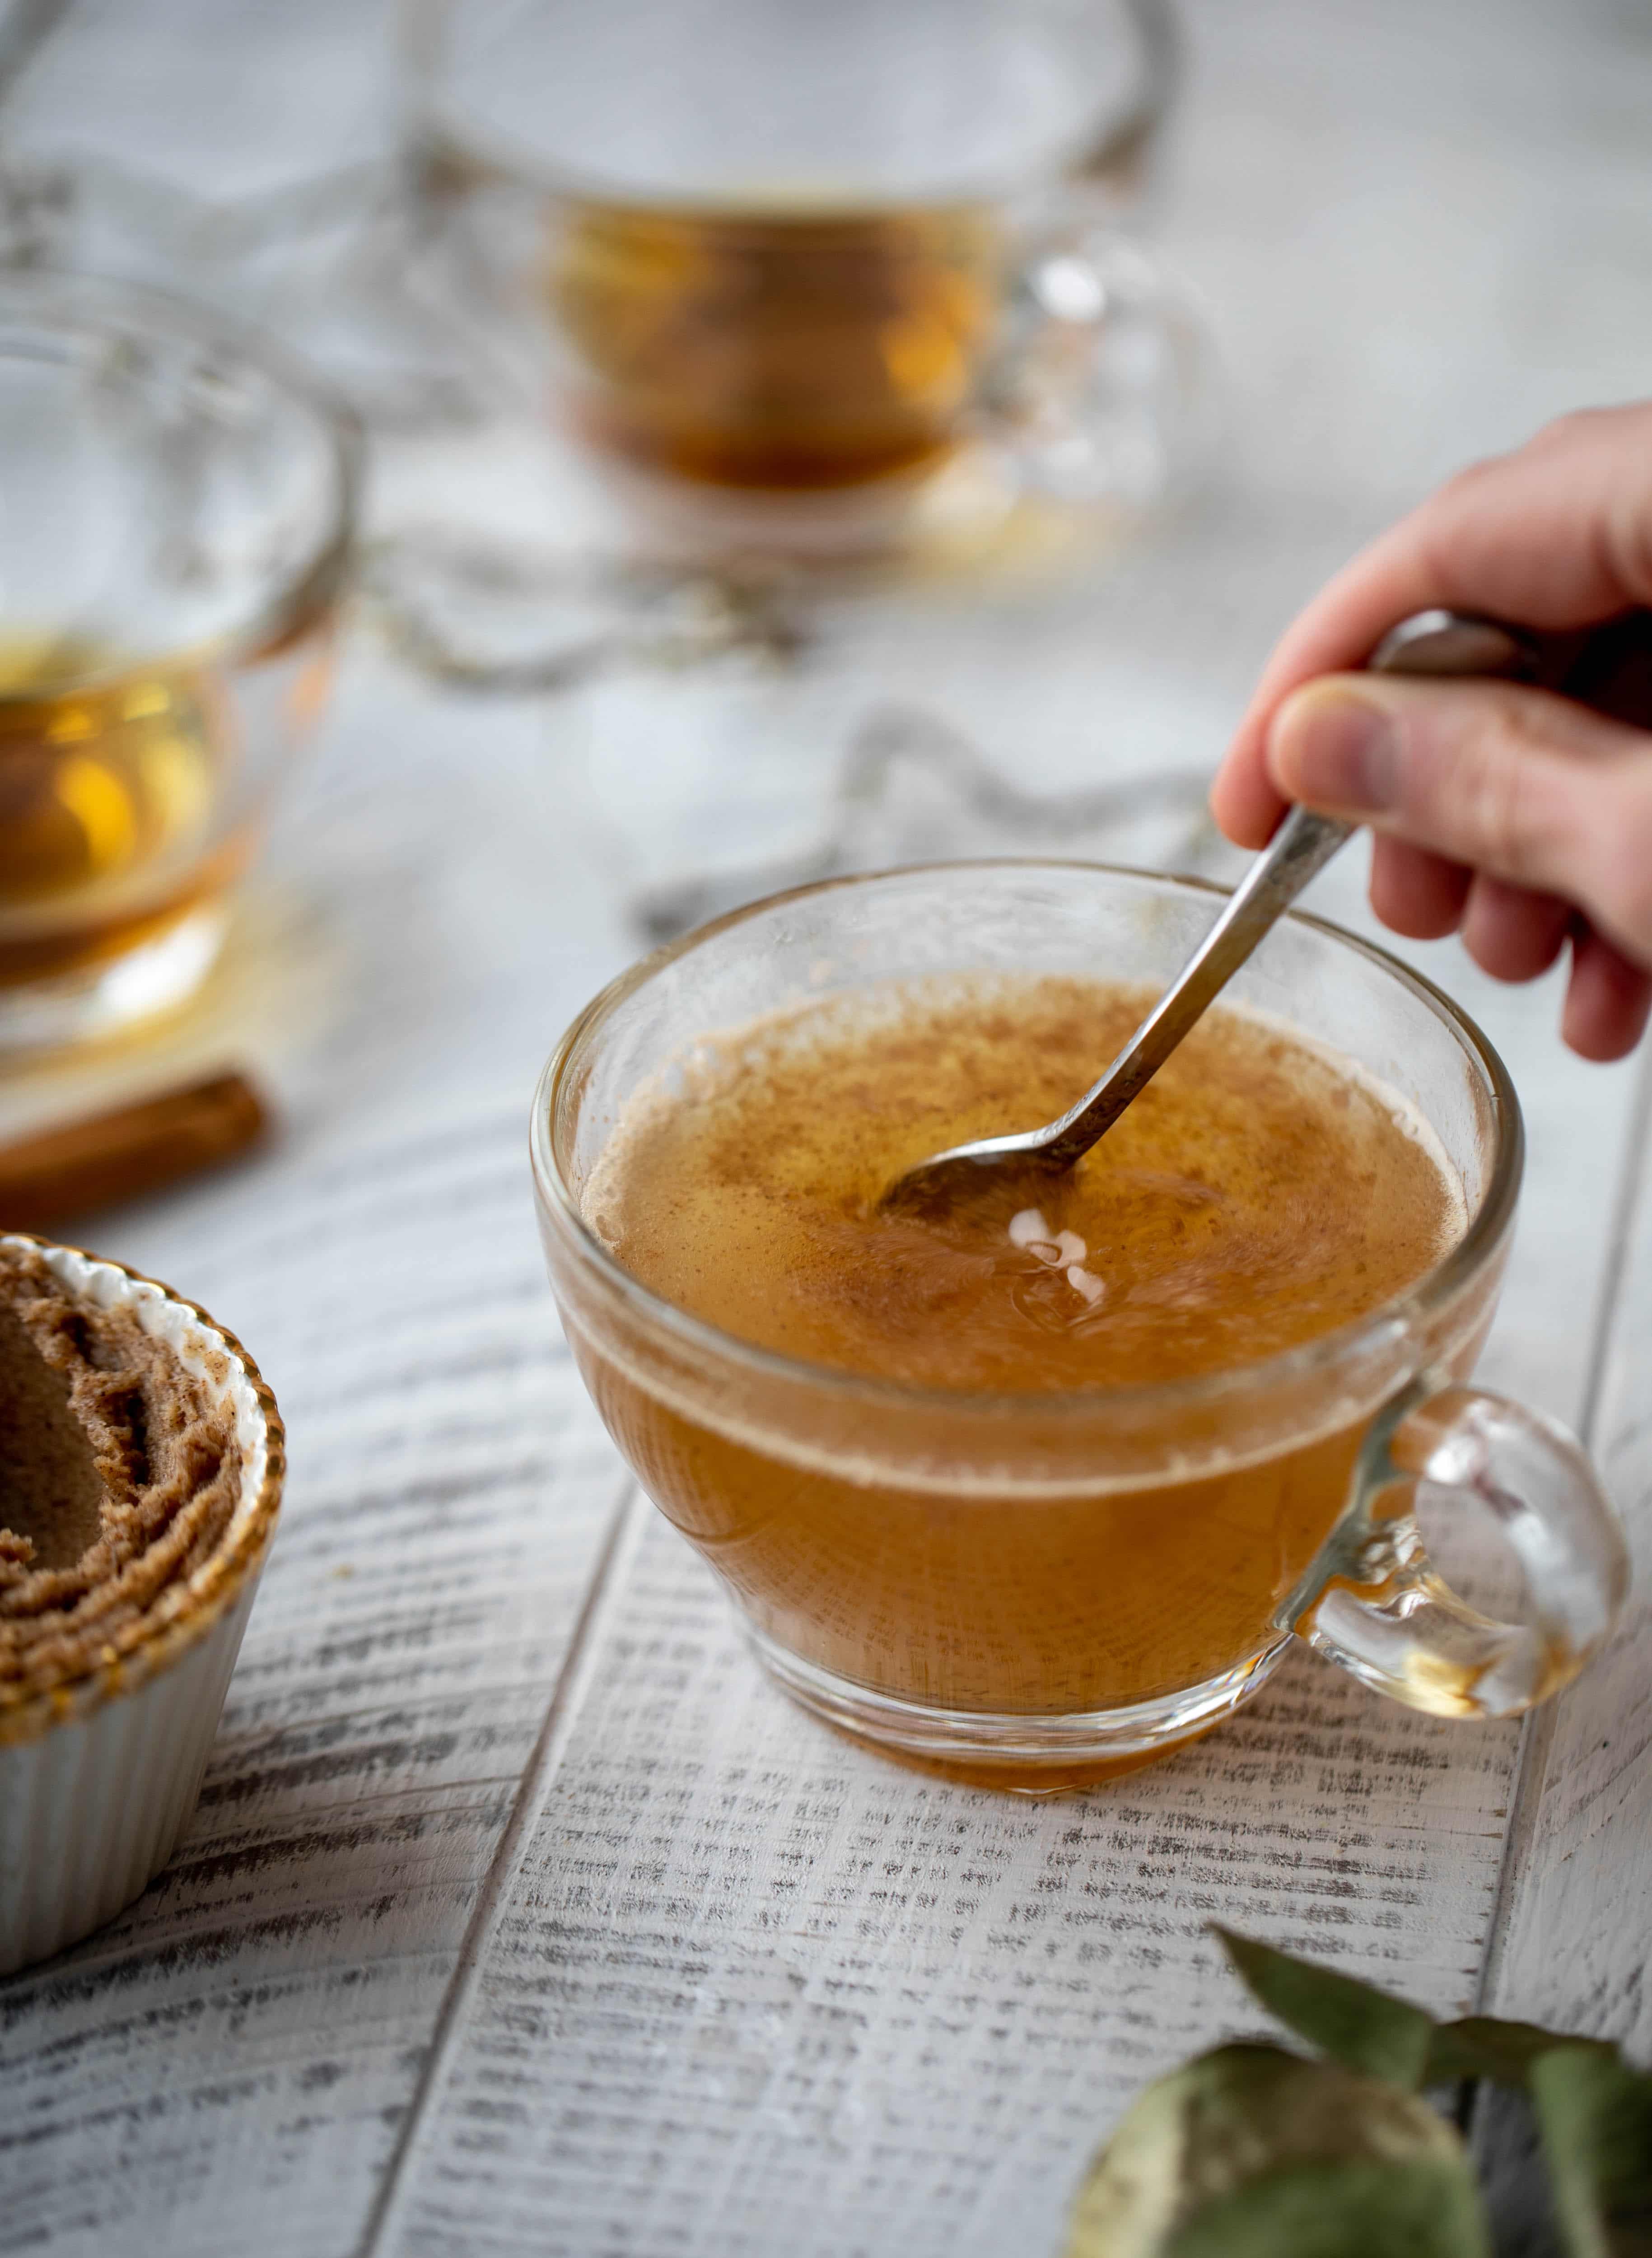 Hot buttered bourbon is a warming, spiced cozy drink that is perfect for chilly nights! Save batter in the fridge so you can have it whenever you'd like!